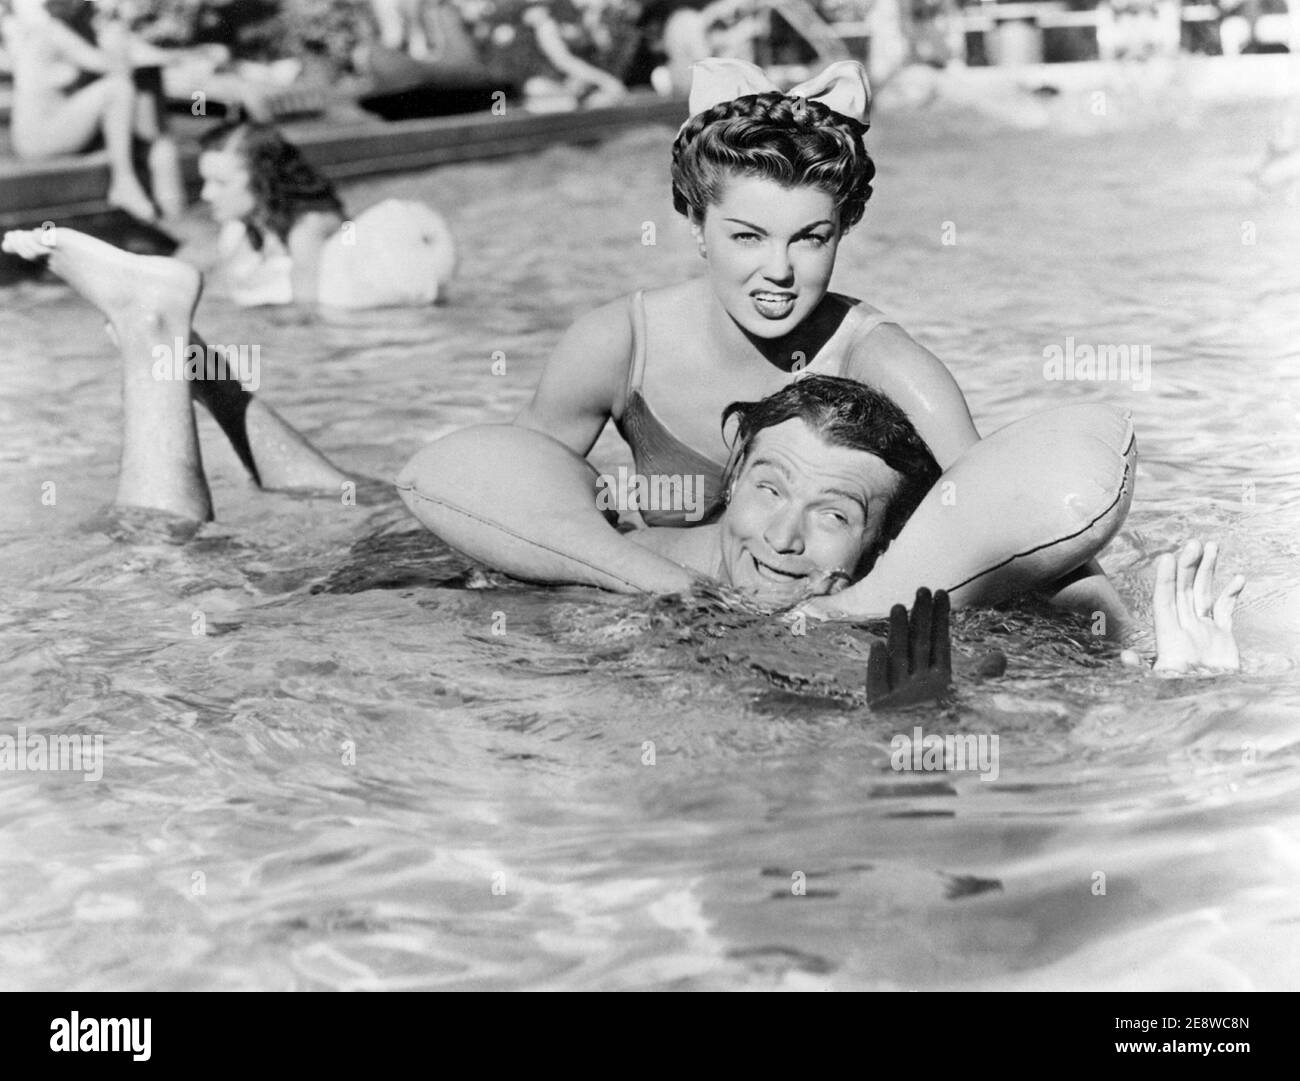 Esther Williams. American competitive swimmer and actress born